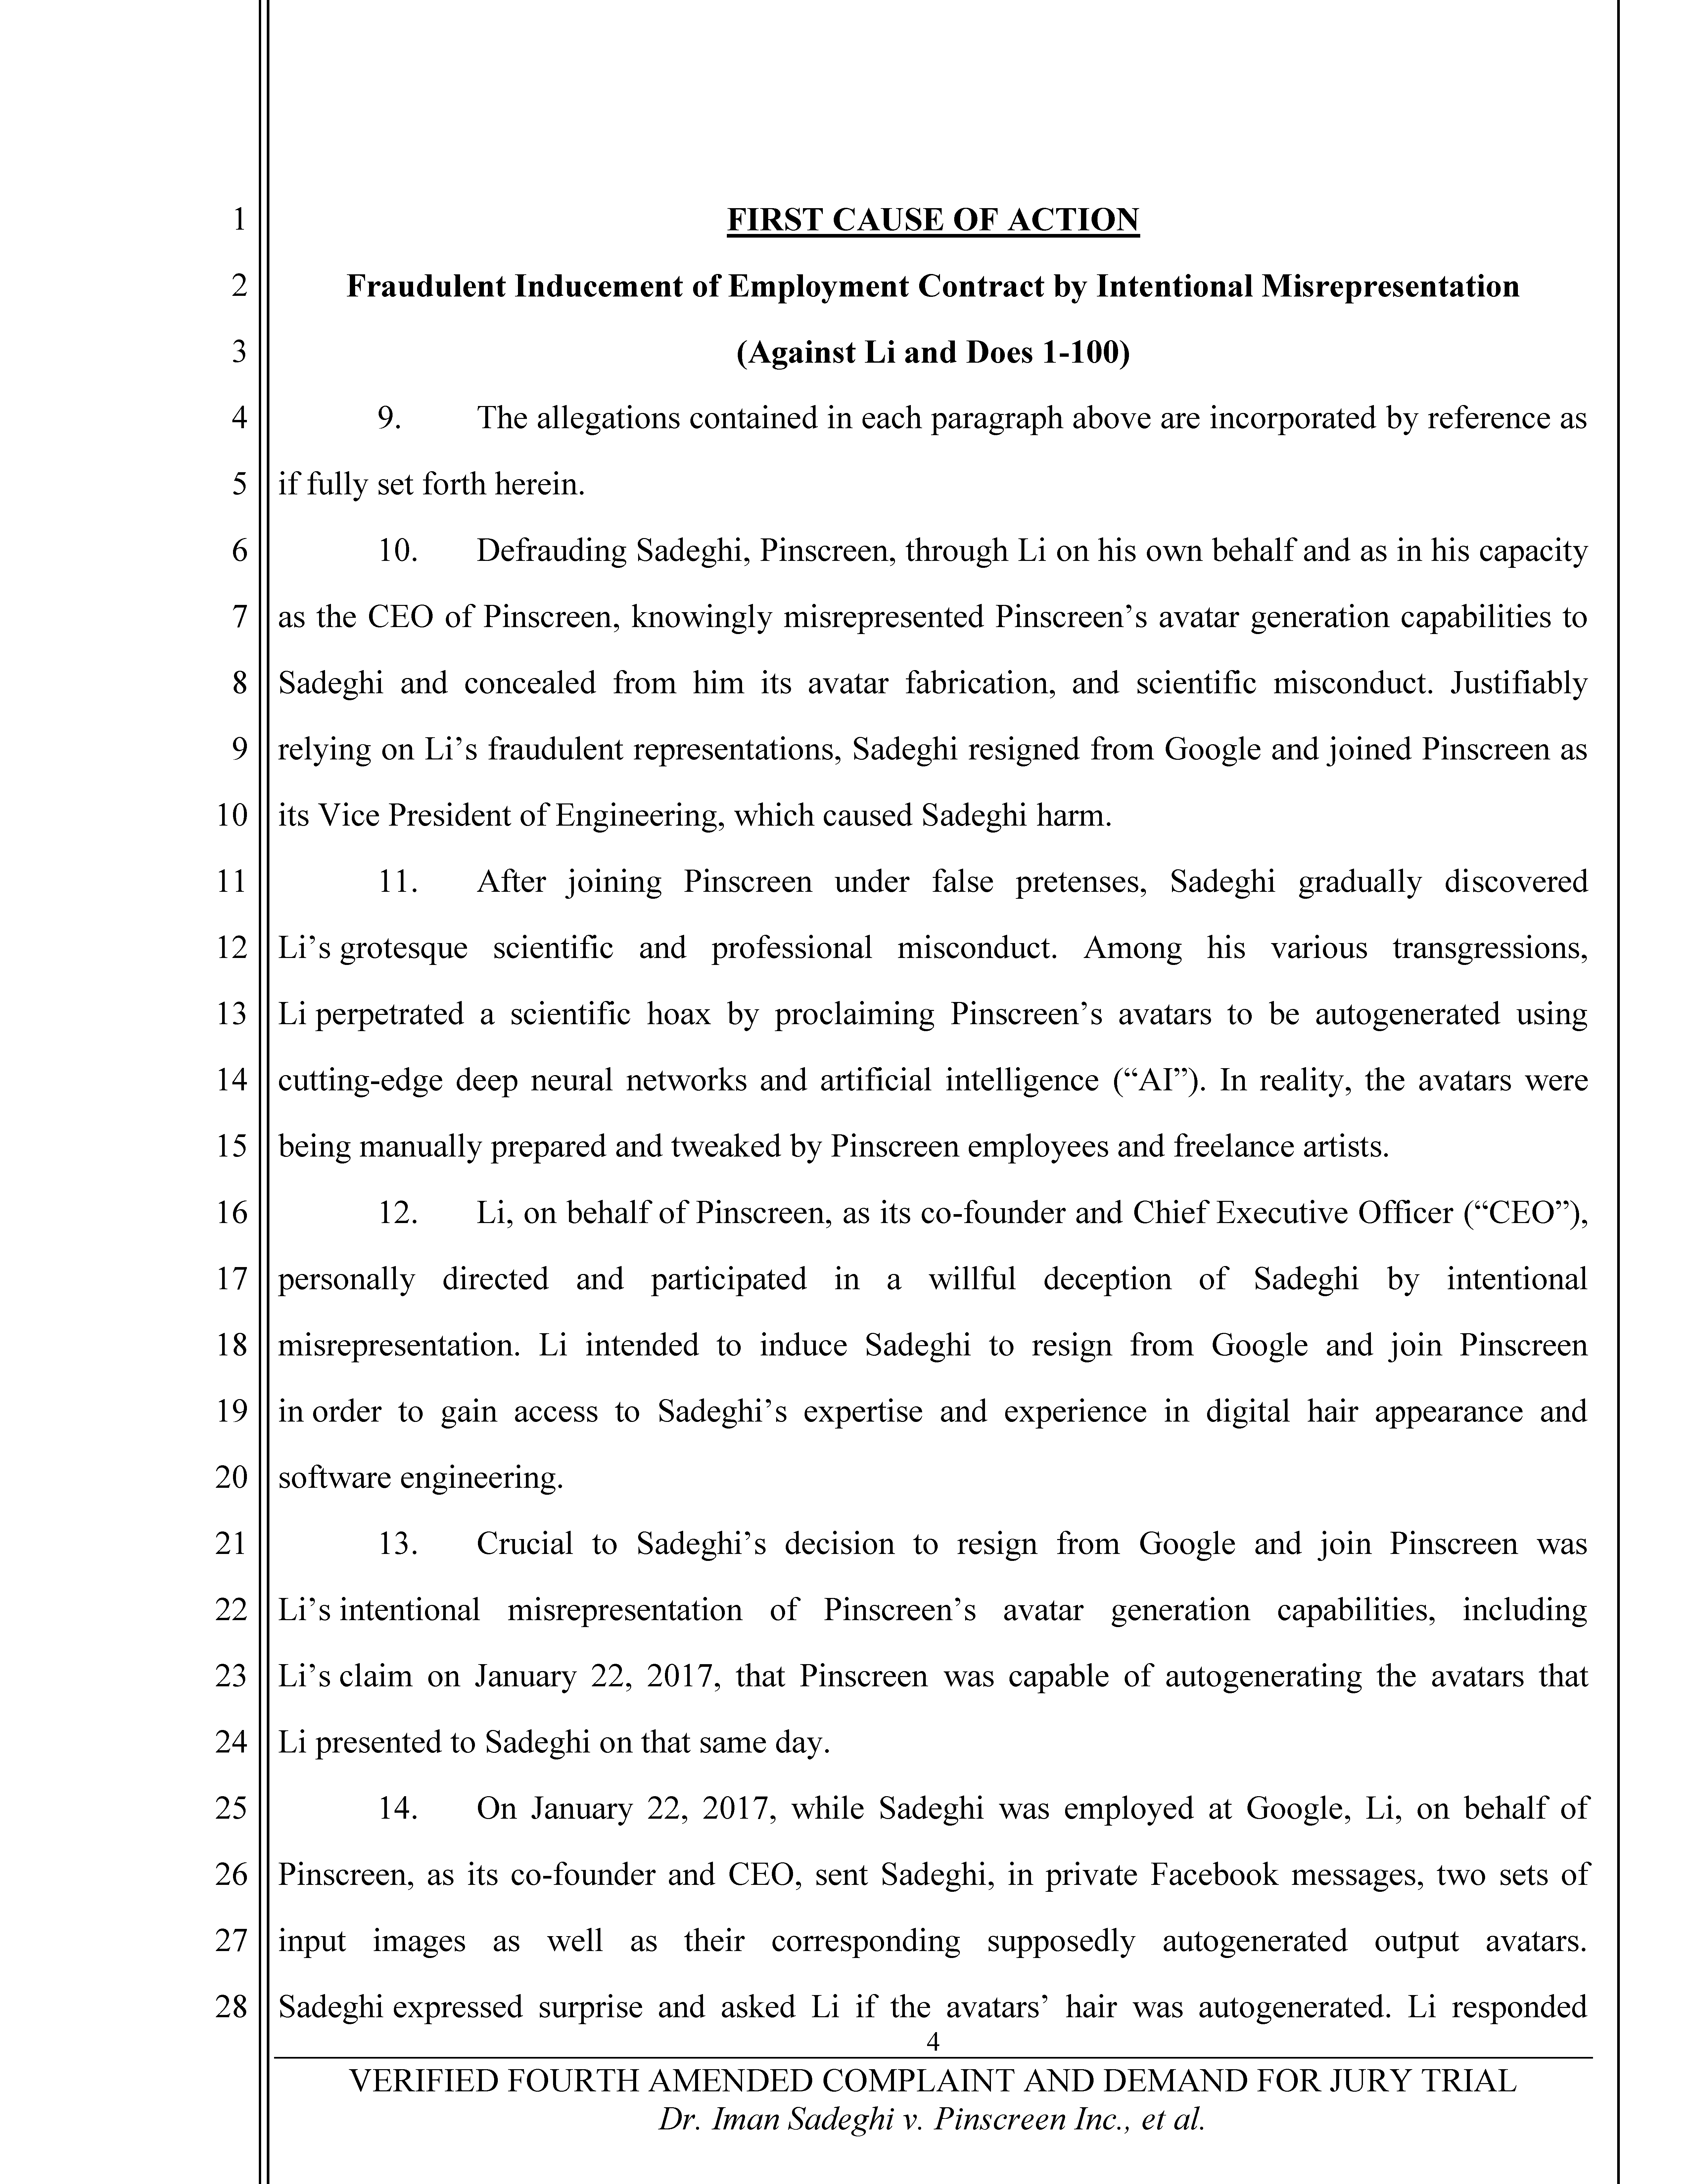 Fourth Amended Complaint (4AC) Page 5